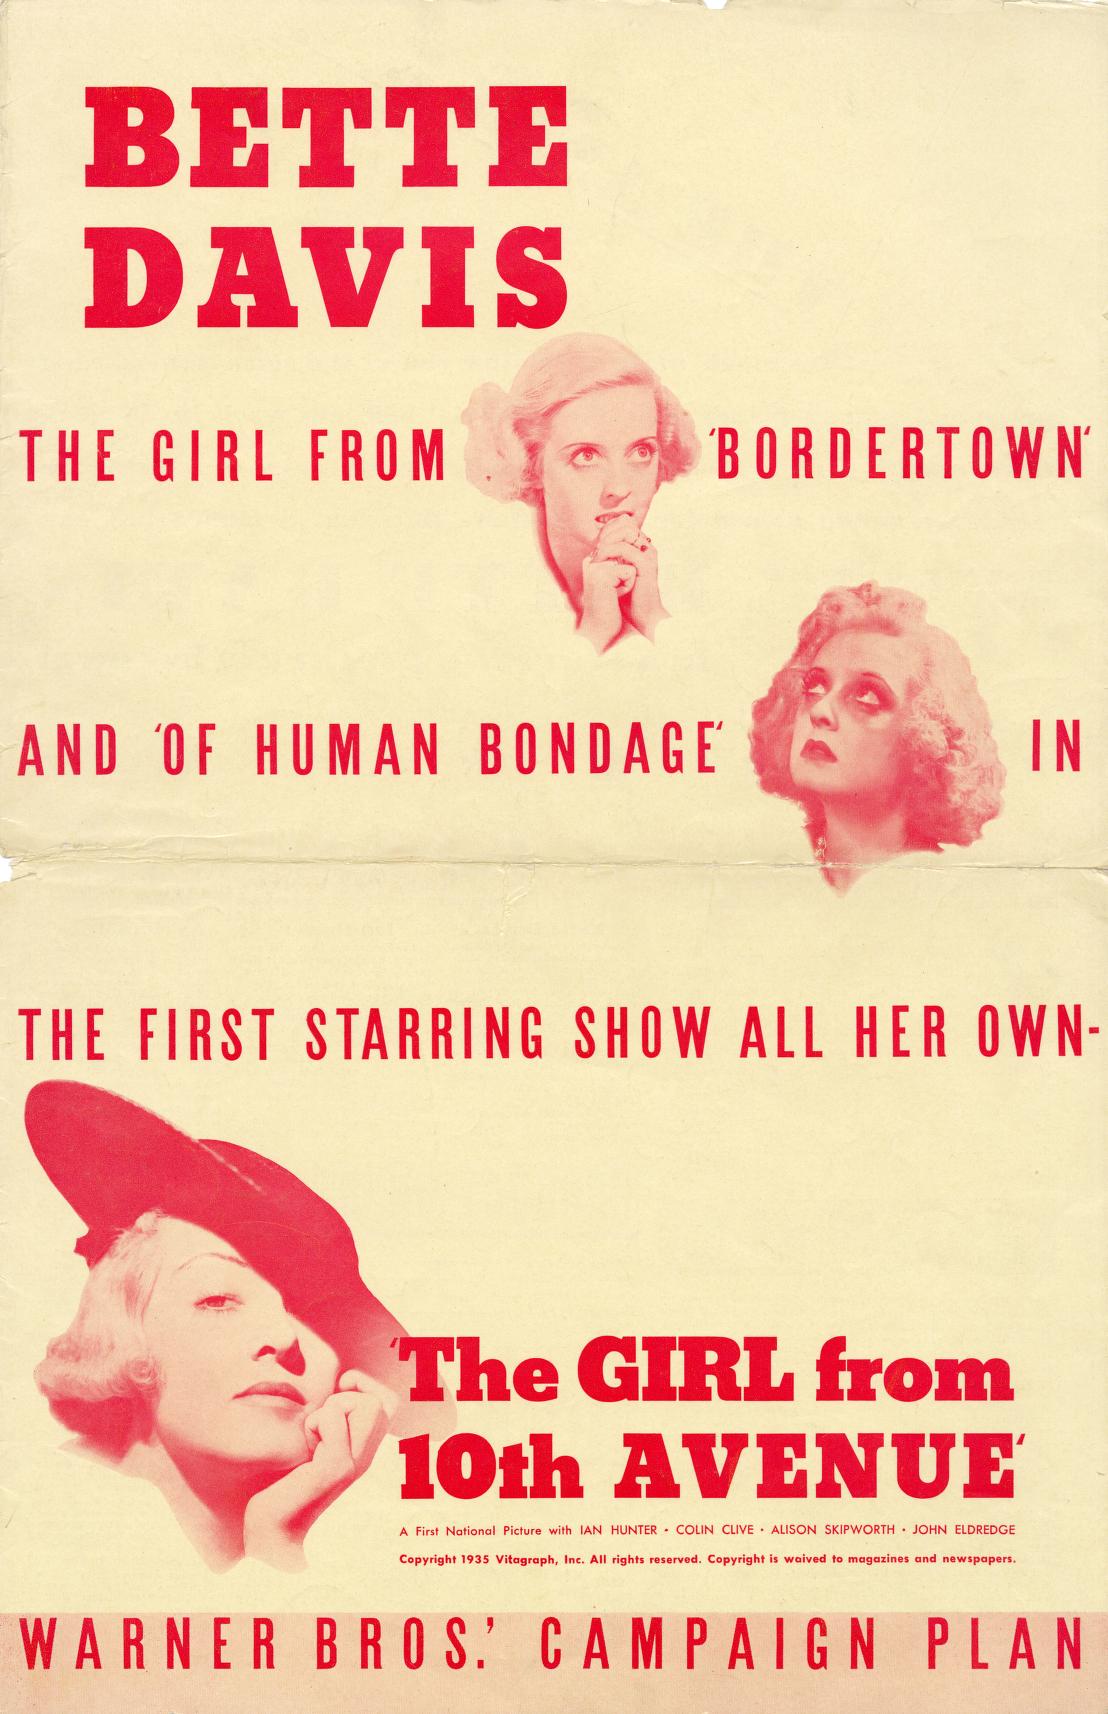 The Girl from 10th Avenue (Warner Bros.)